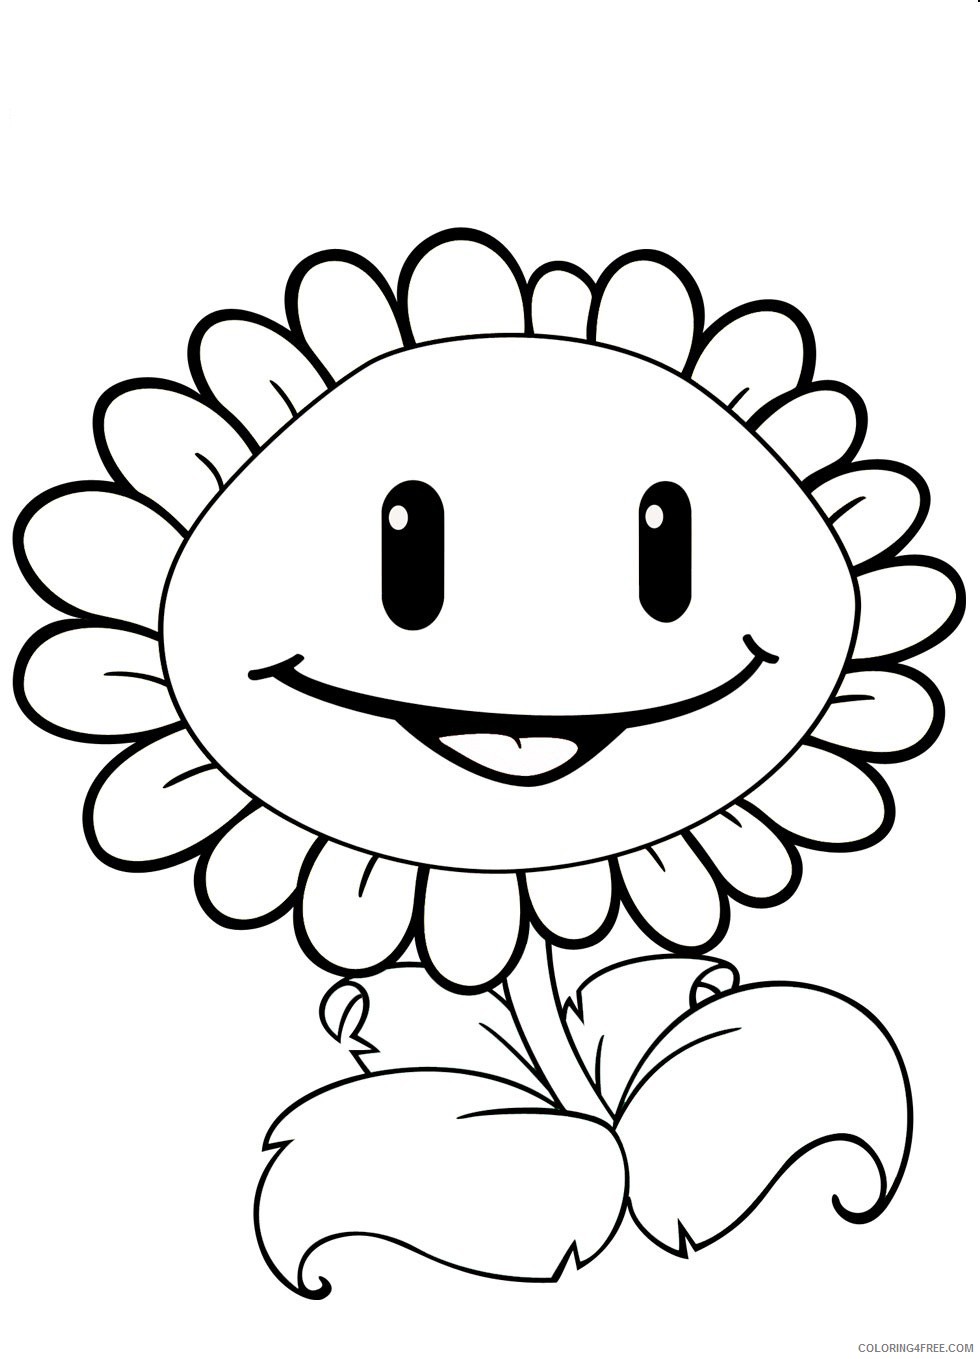 plants vs zombies coloring pages for kids Coloring4free